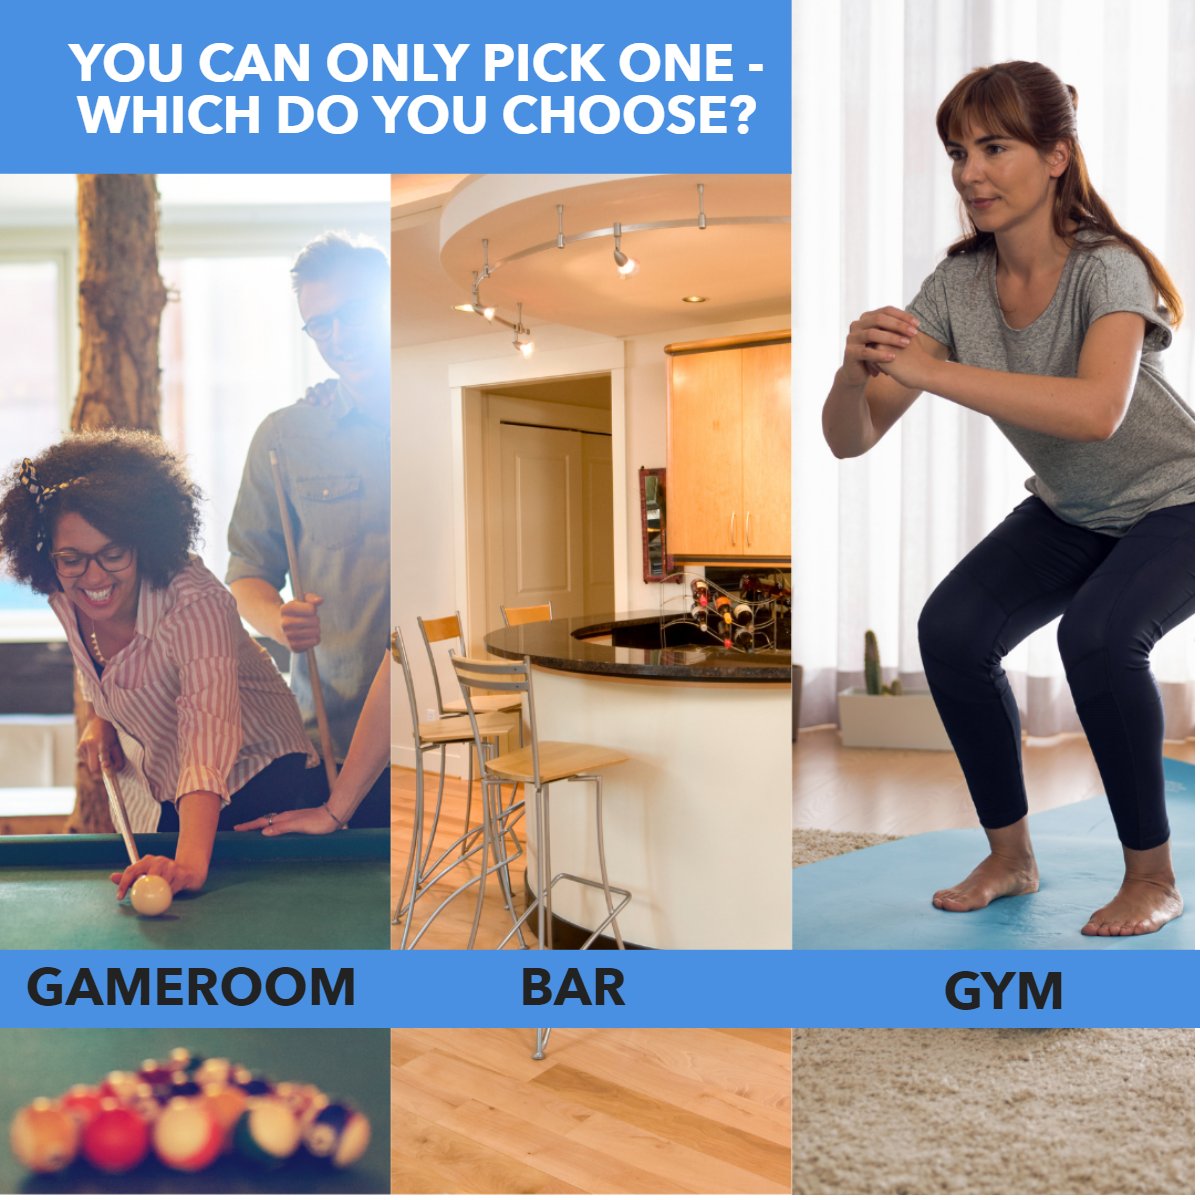 Extra room in your home? If you could only pick one, which would you choose?

1. Game Room
2. Bar
3. Home Gym

Let us know in the comments! 💭
#BroughtonProperties #518 #KWRI #KWRN #SaratogaNY #HudsonNY #UpstateNY #KWBroughtonProperties #UpstateLuxuryProperties